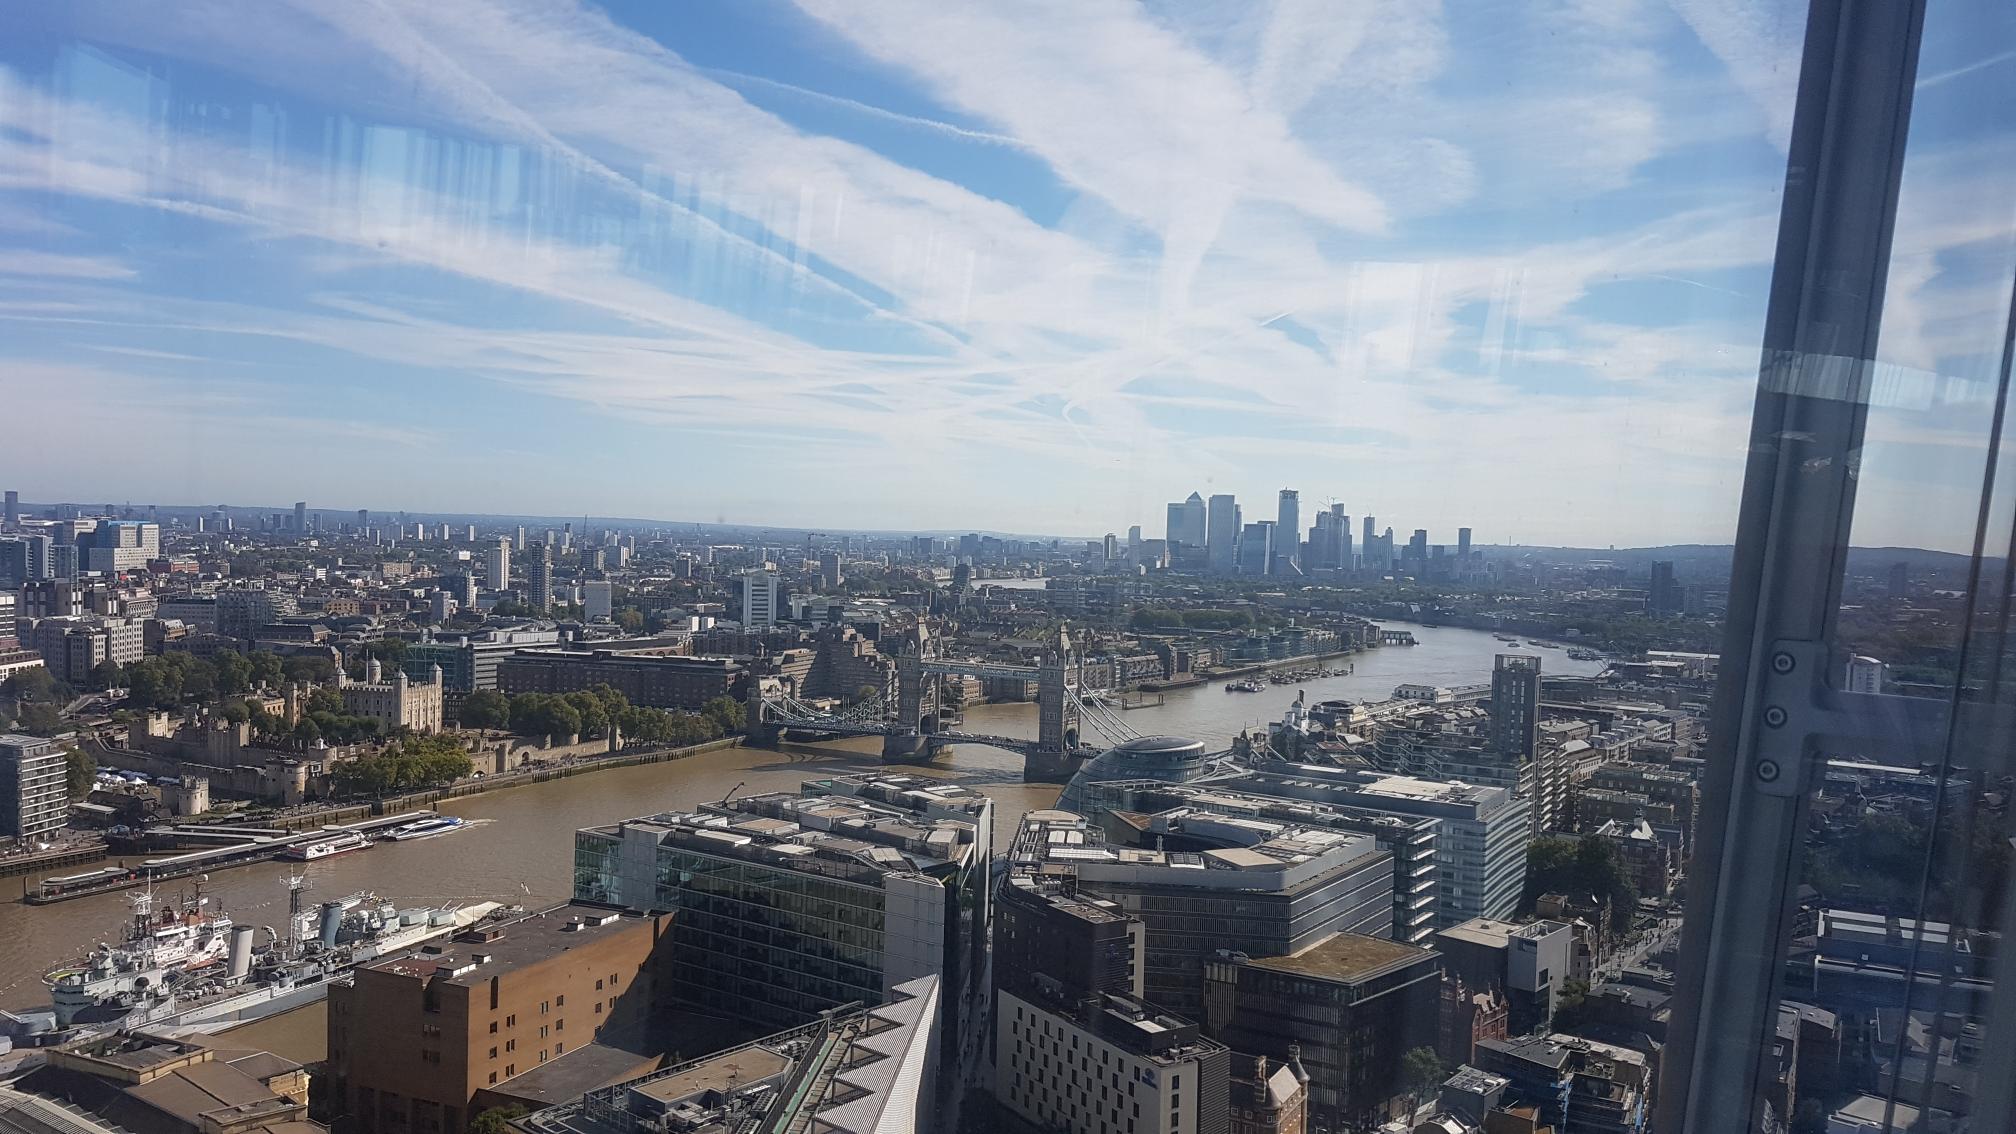 "And they call this work" - A trade lunch at Oblix Restaurant, The Shard